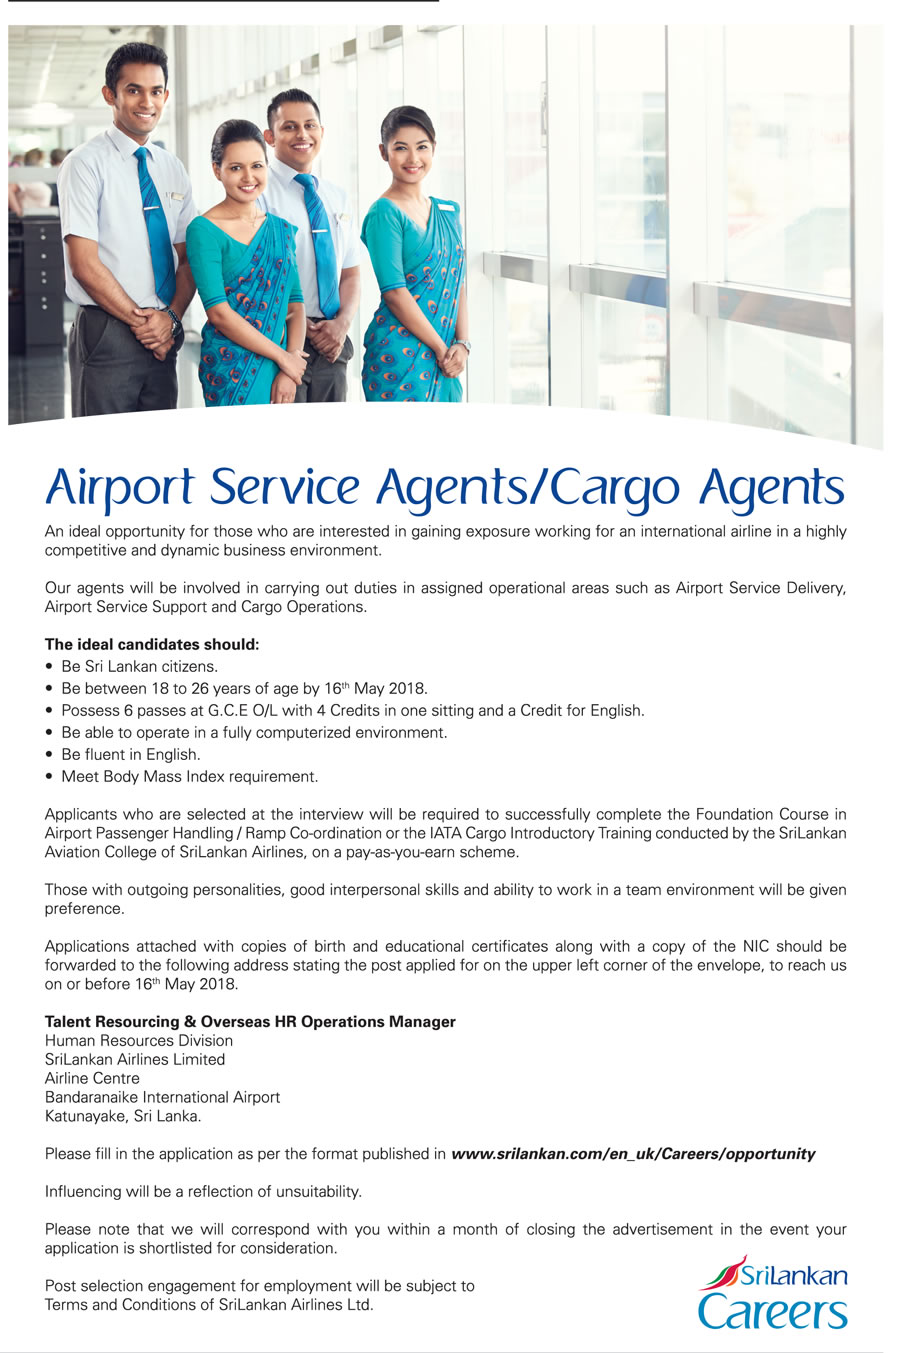 Airport Service Agent & Cargo Agent Vacancies at SriLankan Airlines